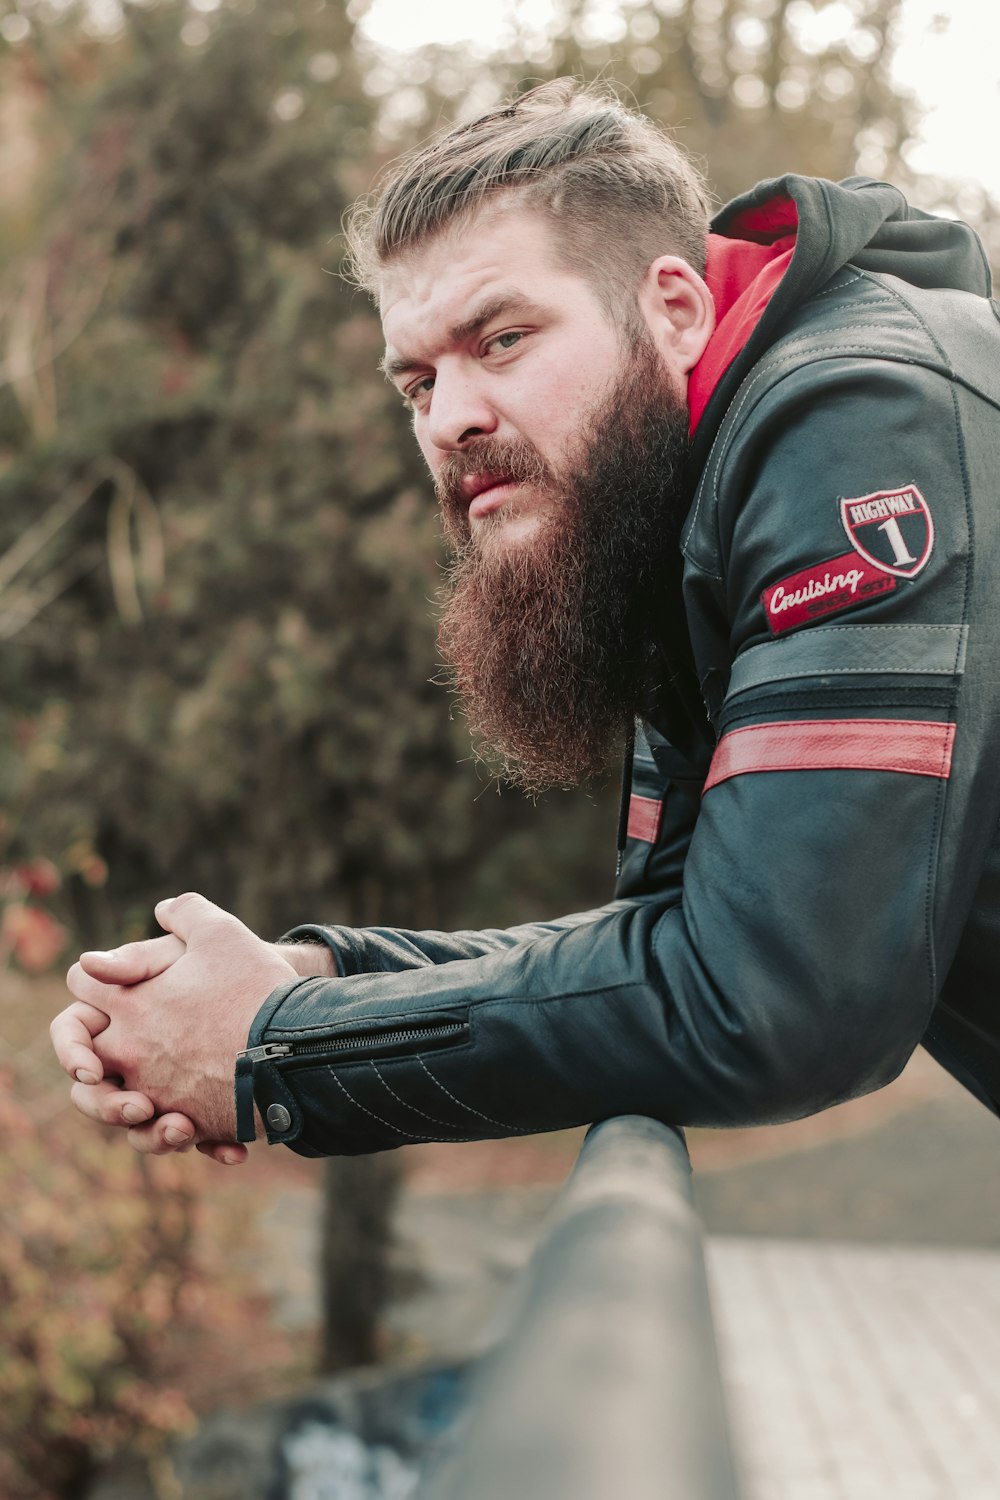 a man with a beard wearing a leather jacket